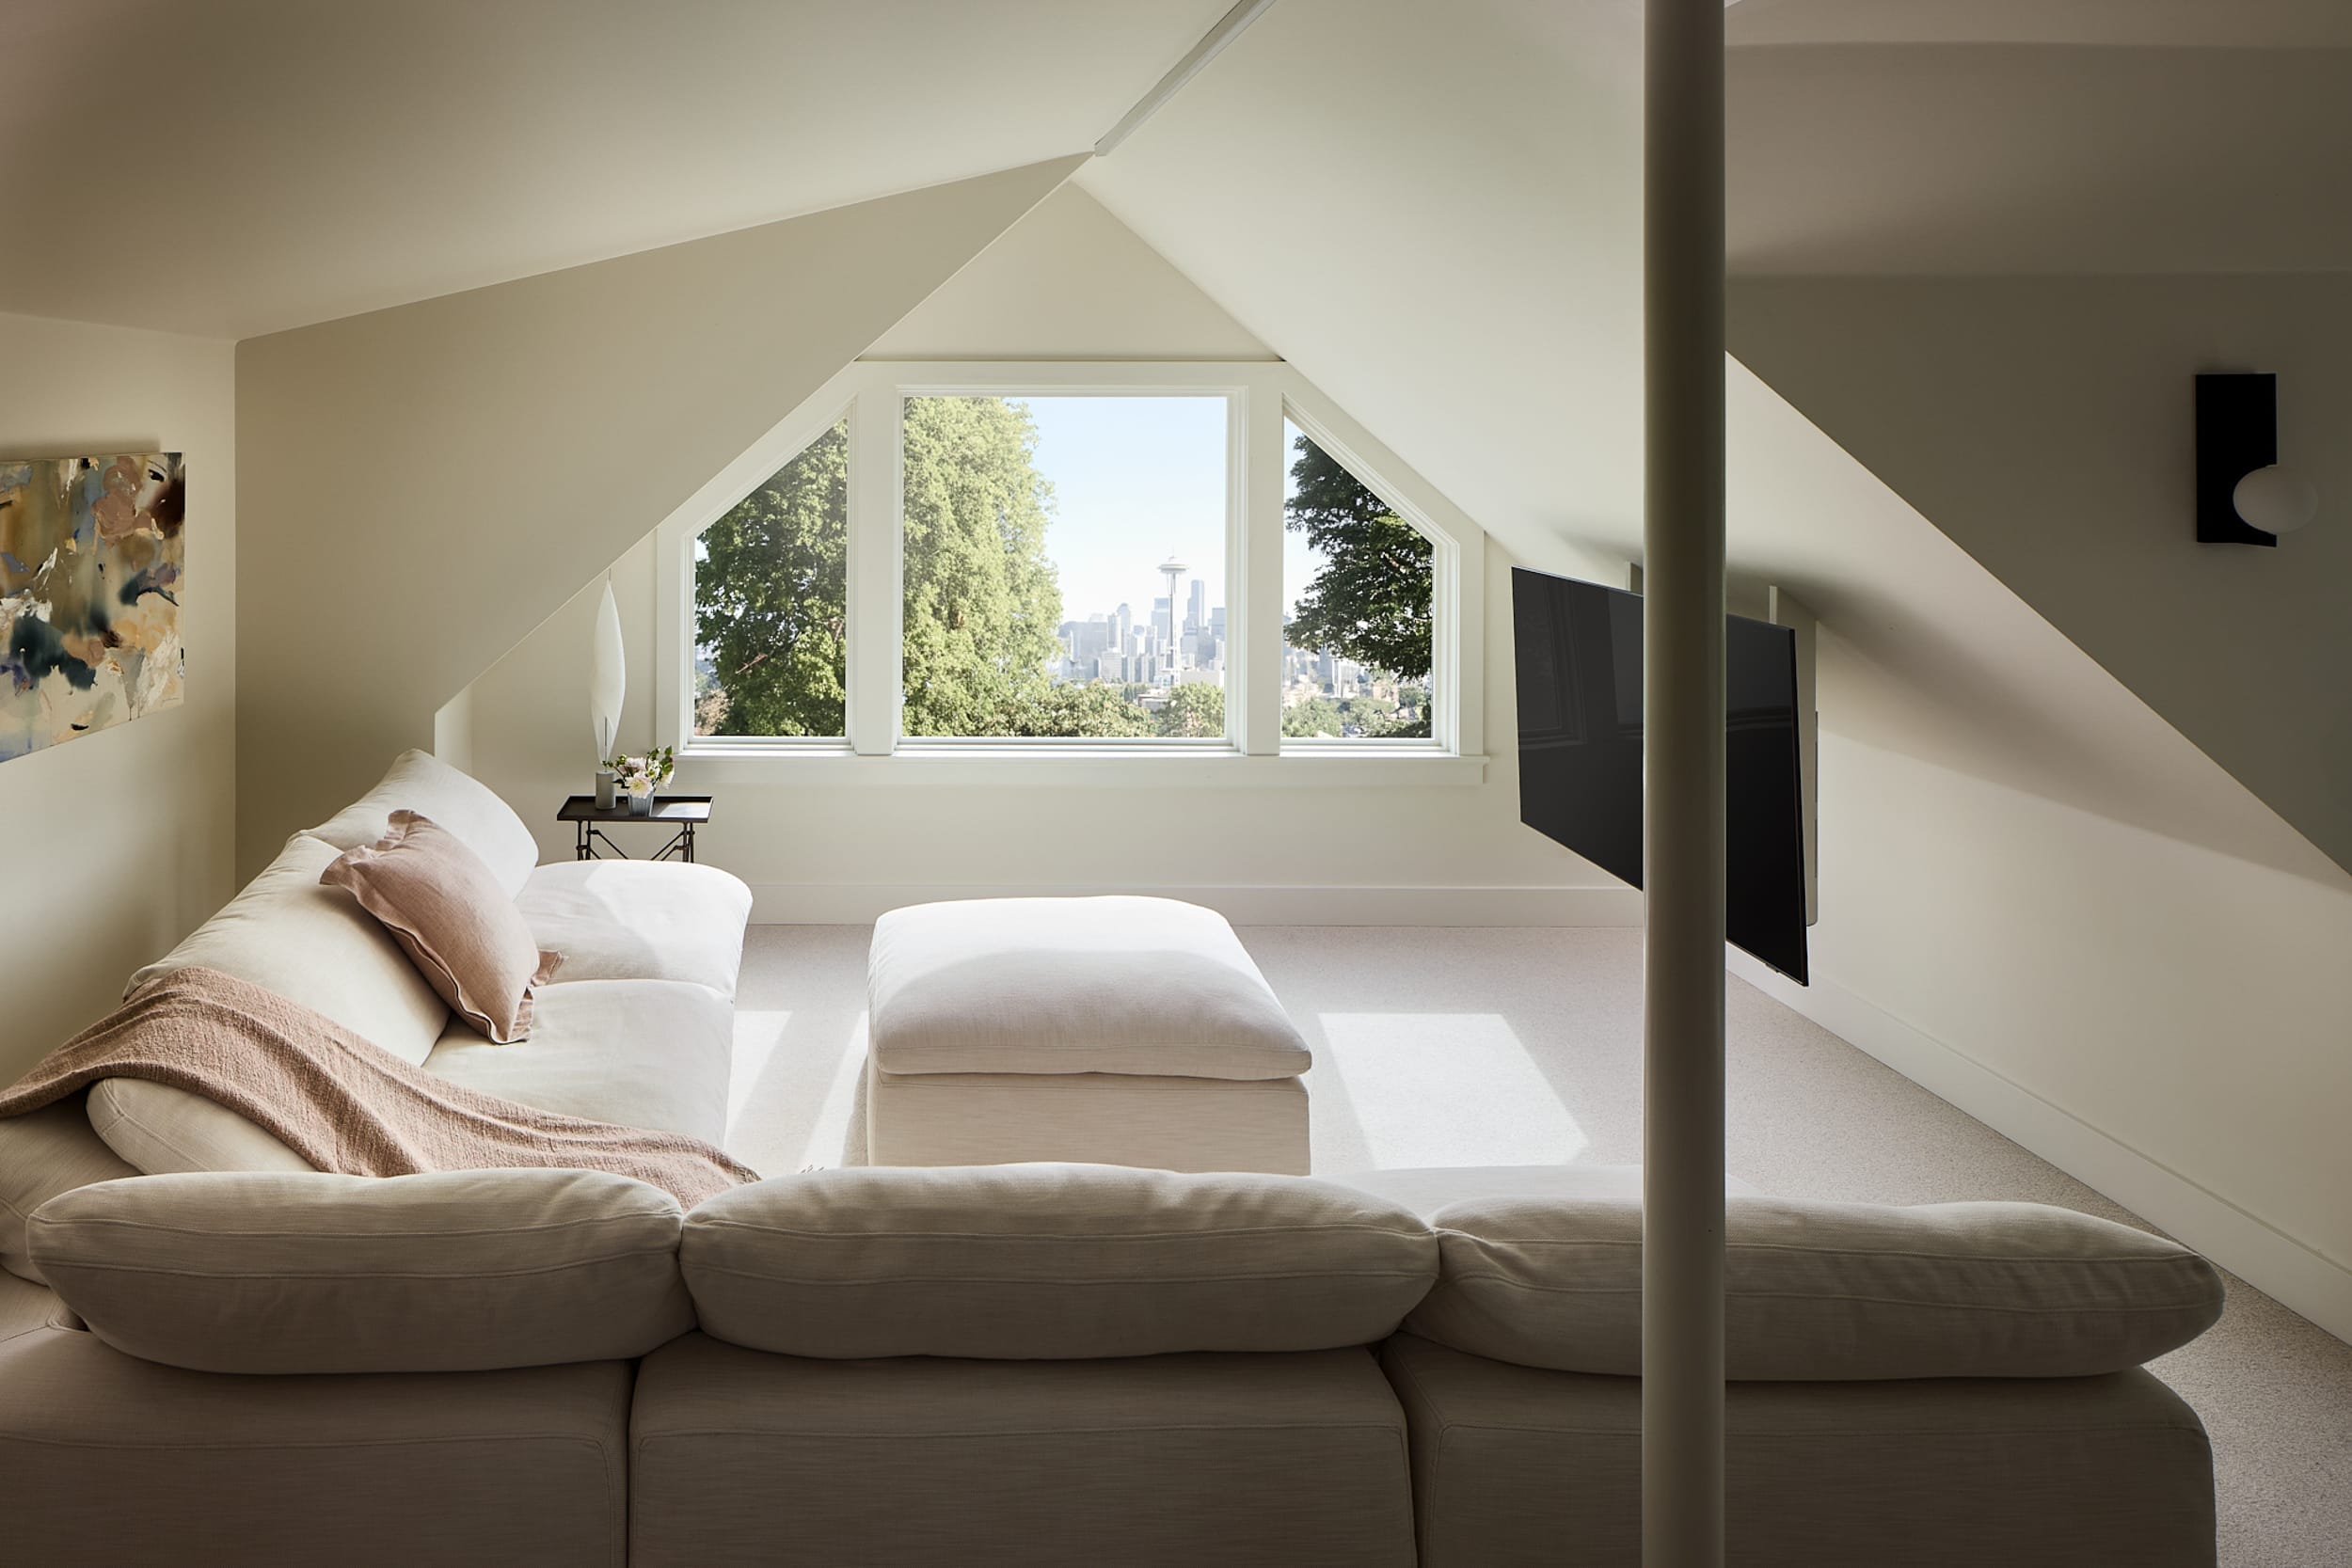 A modern home with a white couch in an attic, offering a stunning view of the city.